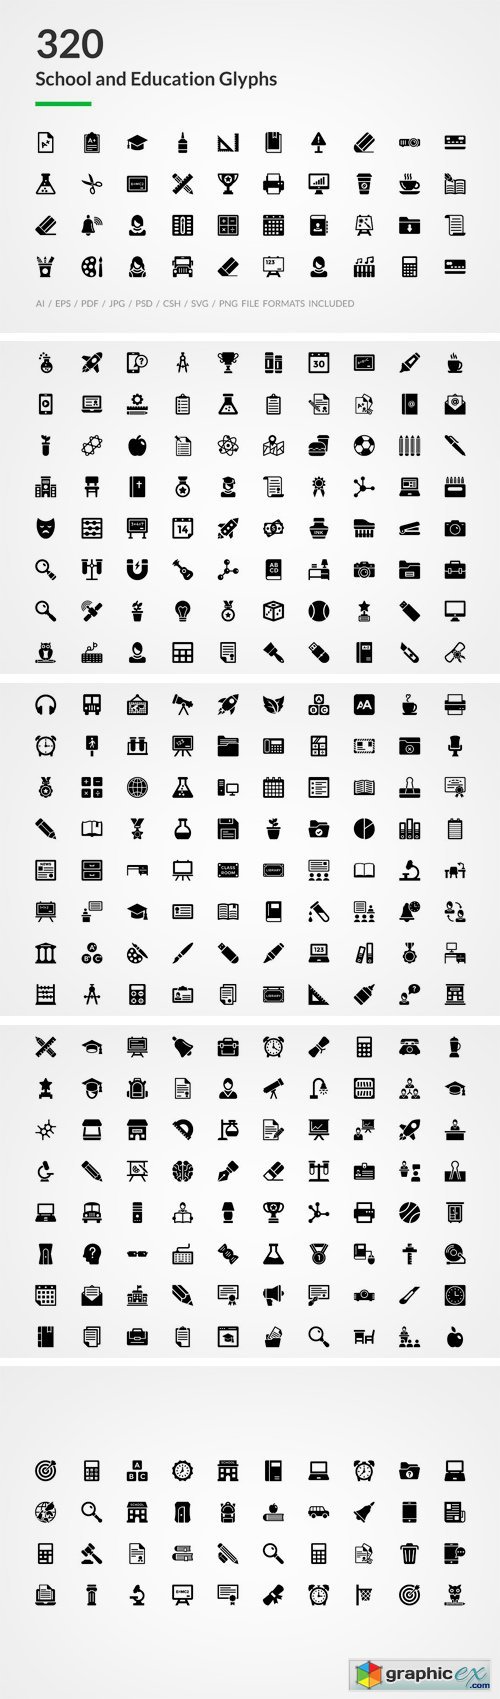 320 School and Education Glyph Icons